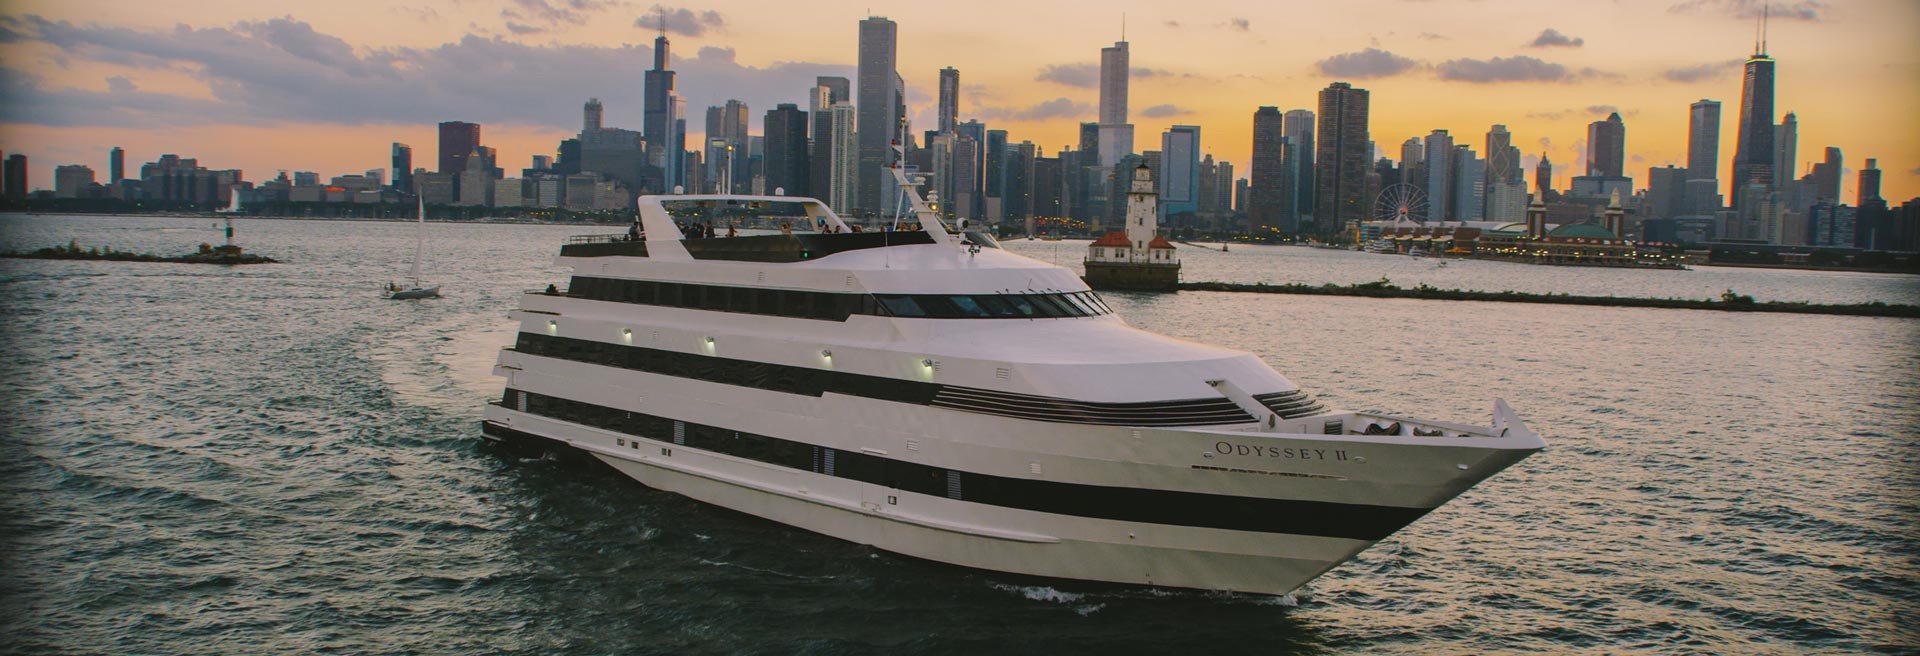 Things to Do in Chicago: Odyssey Dinner Cruise